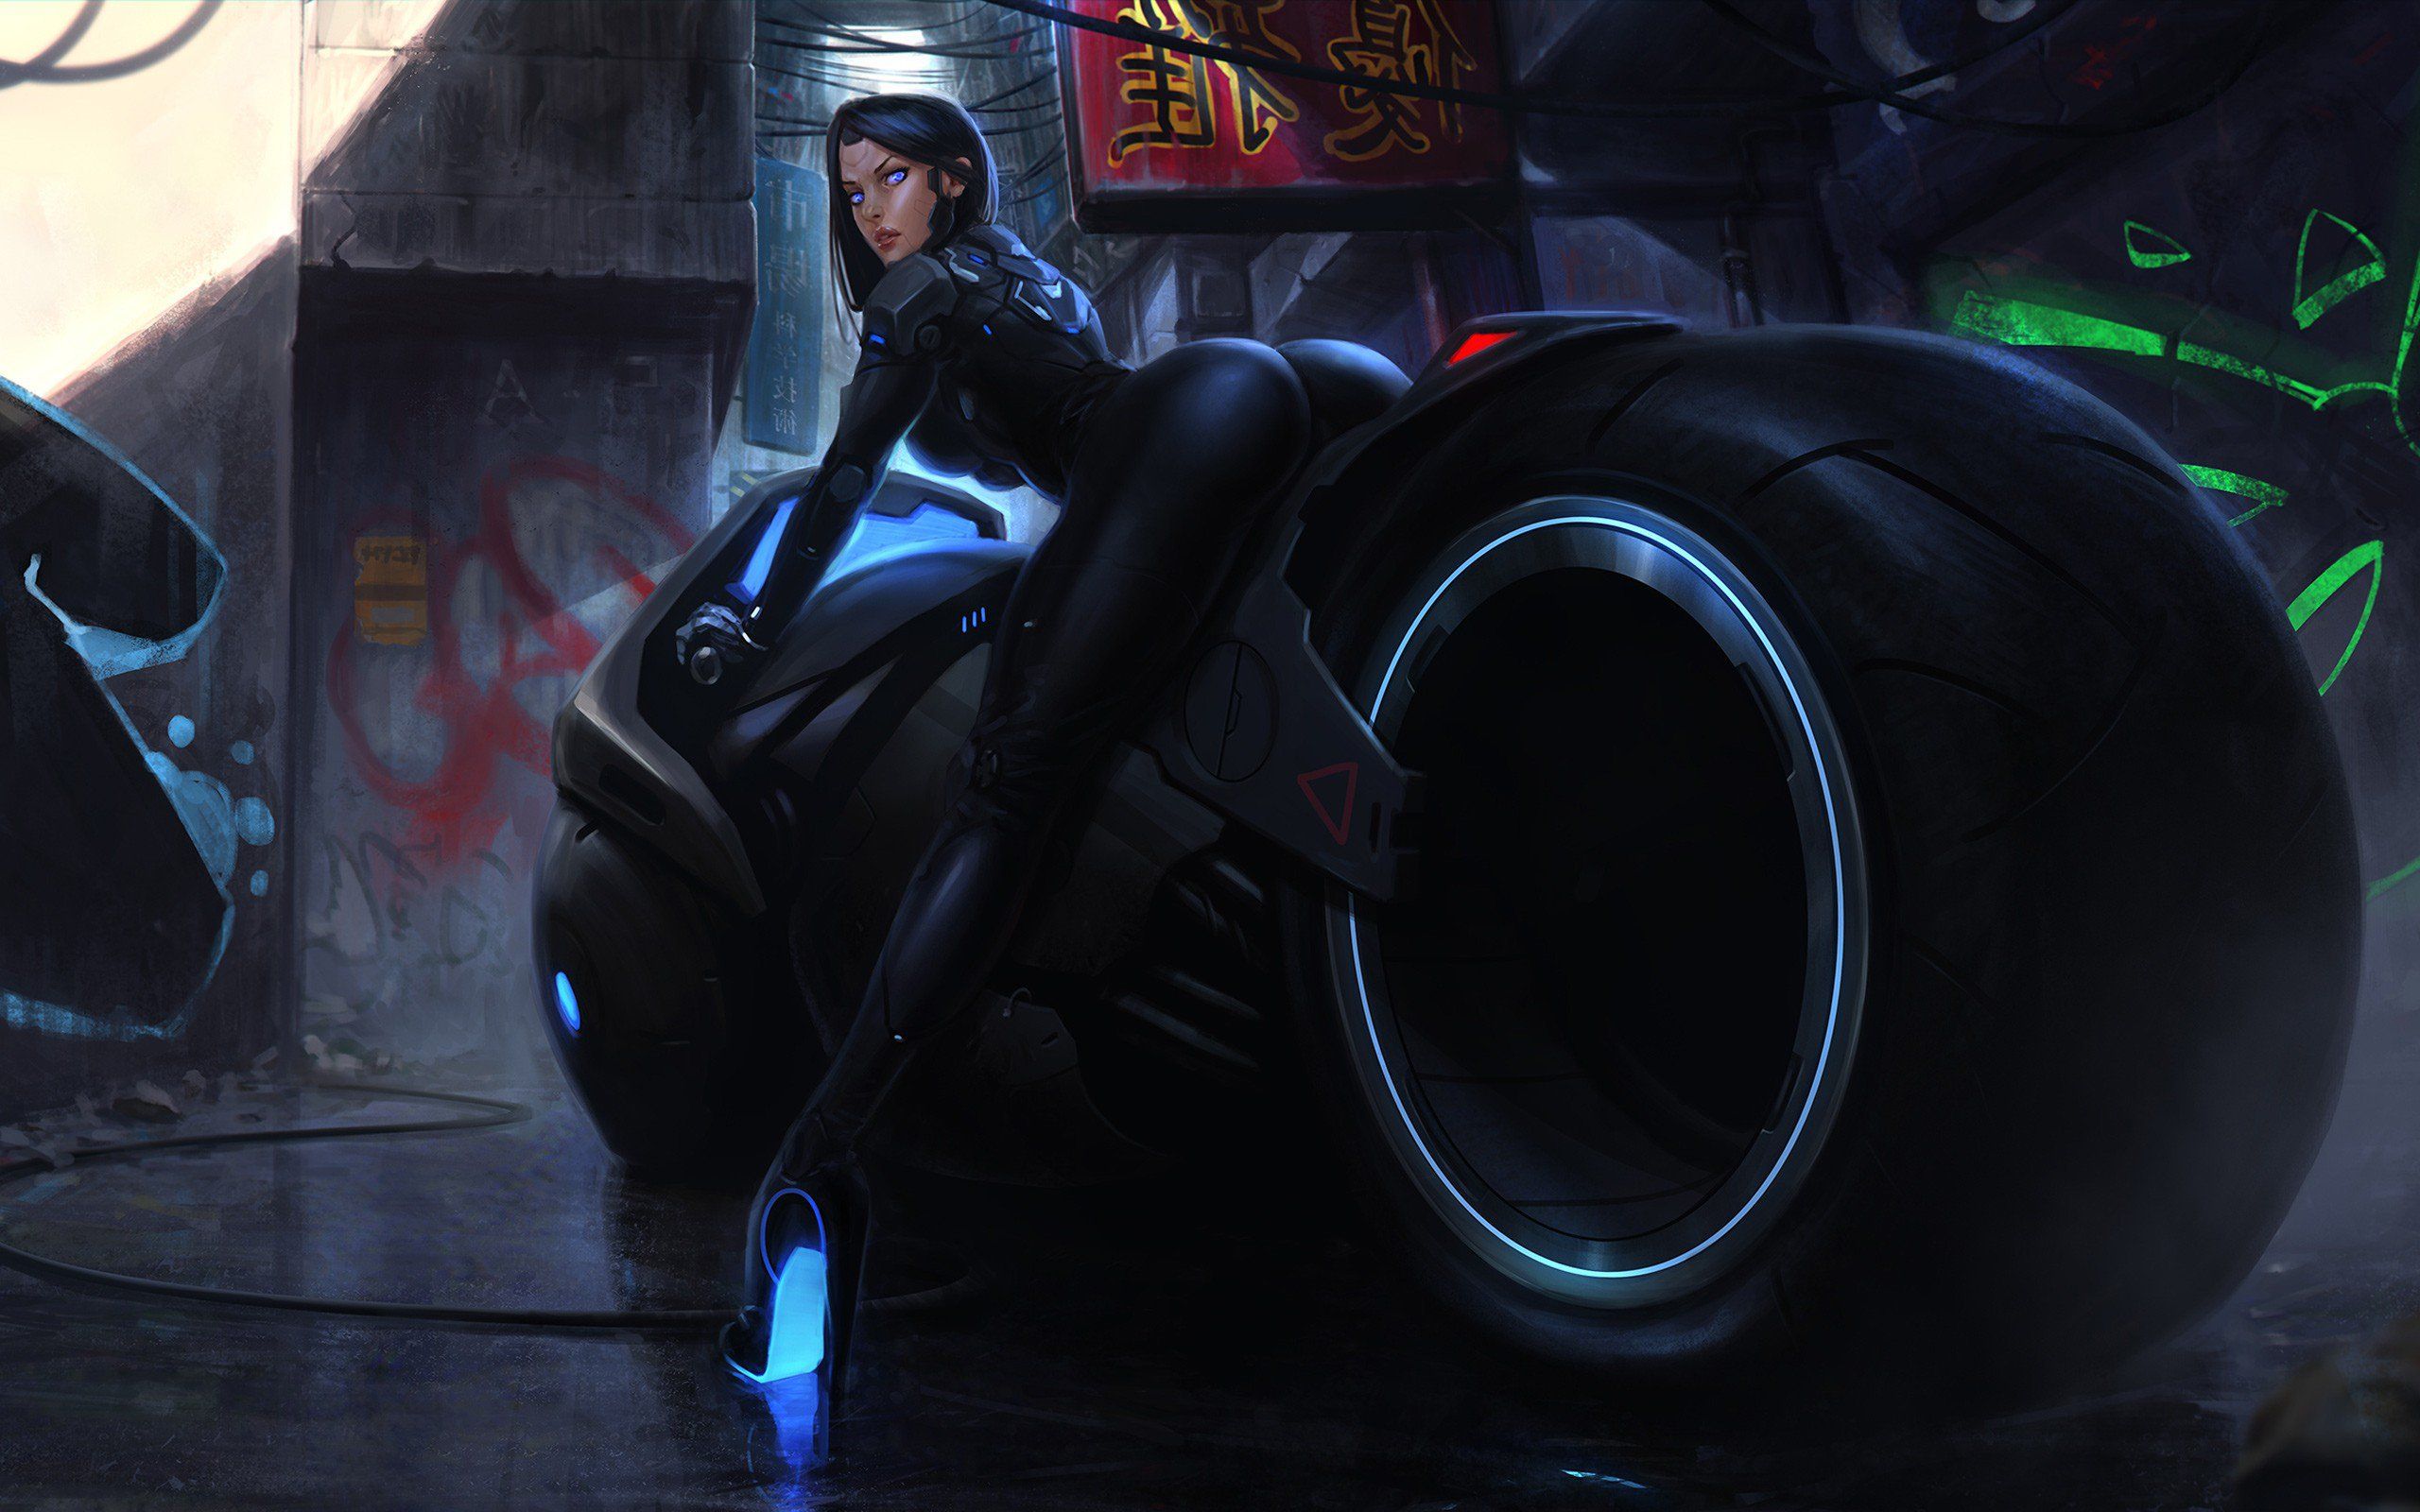 2560x1600 Tron Bike Anime Girl, HD Anime, 4k Wallpaper, Image, Background, Photo and Picture on WallpaperBat